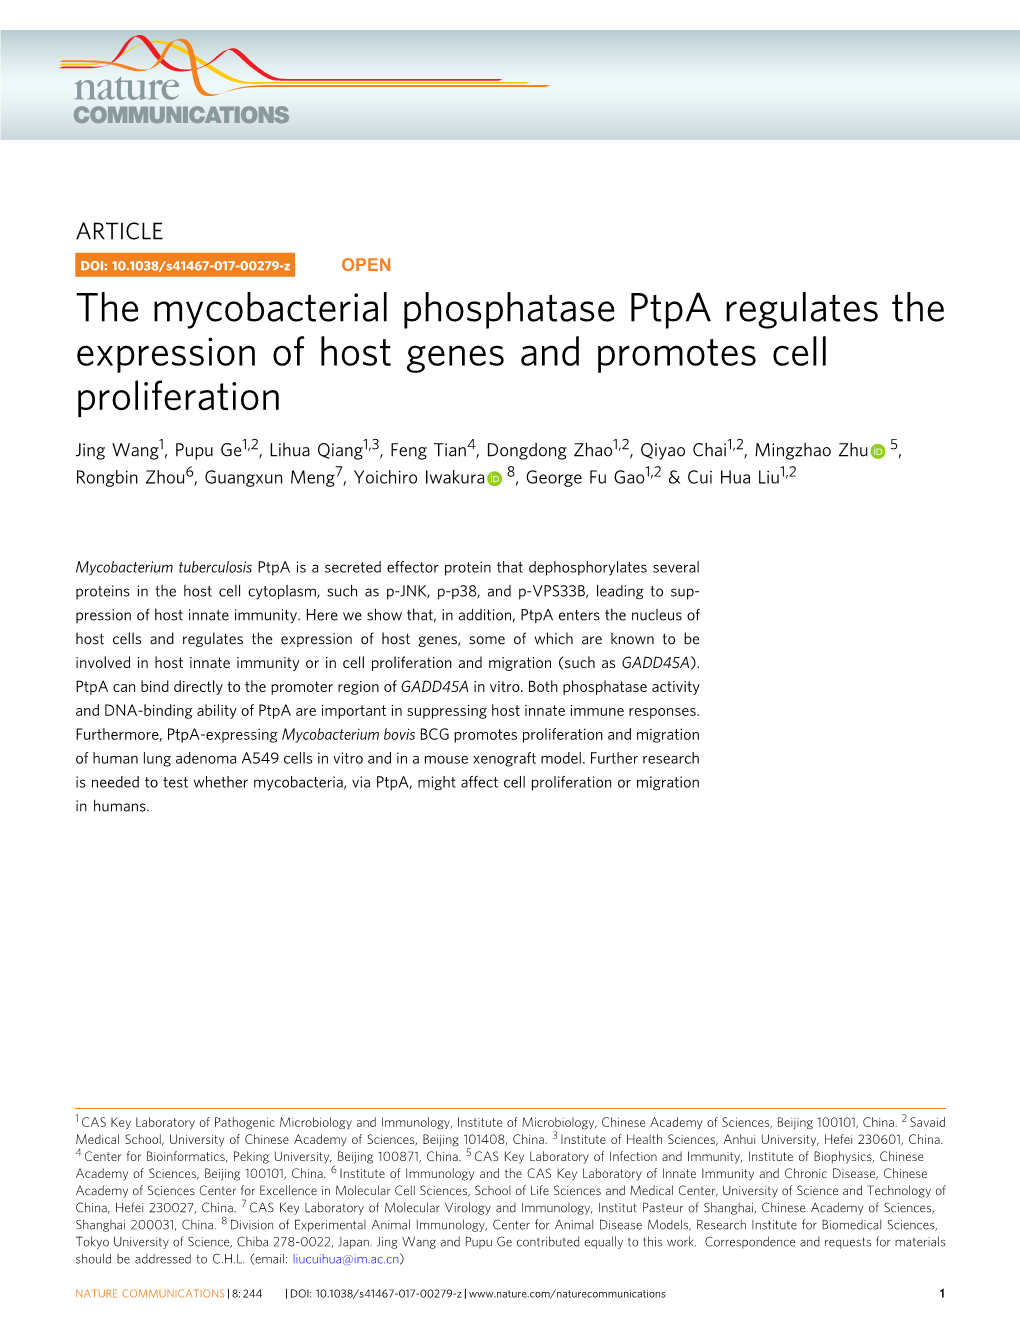 The Mycobacterial Phosphatase Ptpa Regulates the Expression of Host Genes and Promotes Cell Proliferation